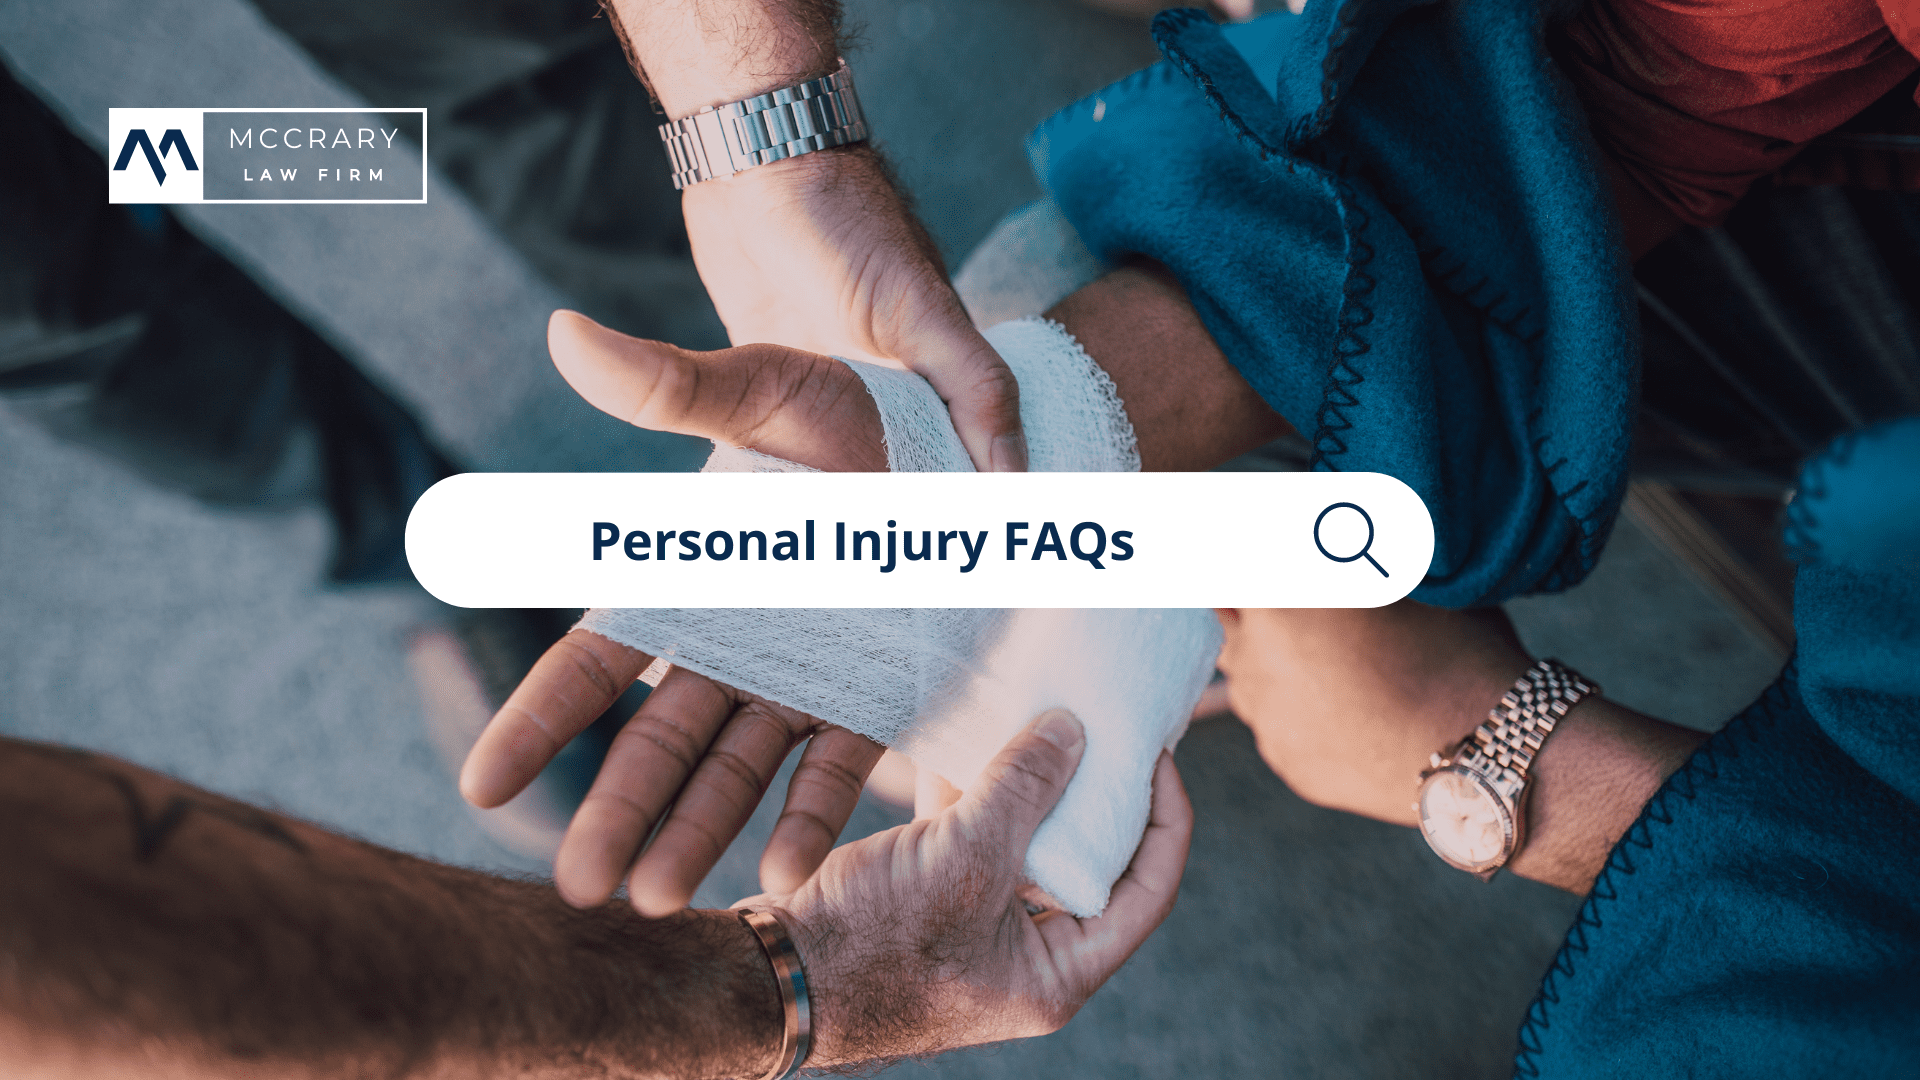 Personal injury legal assistance concept showing a close-up of hands bandaging a wrist, with the search bar caption 'Personal Injury FAQs' and the McCrary Law Firm logo, representing a guide to personal injury claims in Colorado, offering insights into legal rights and steps for compensation for injuries like car accidents, slips and falls, or medical malpractice, as explained by The McCrary Law Firm.